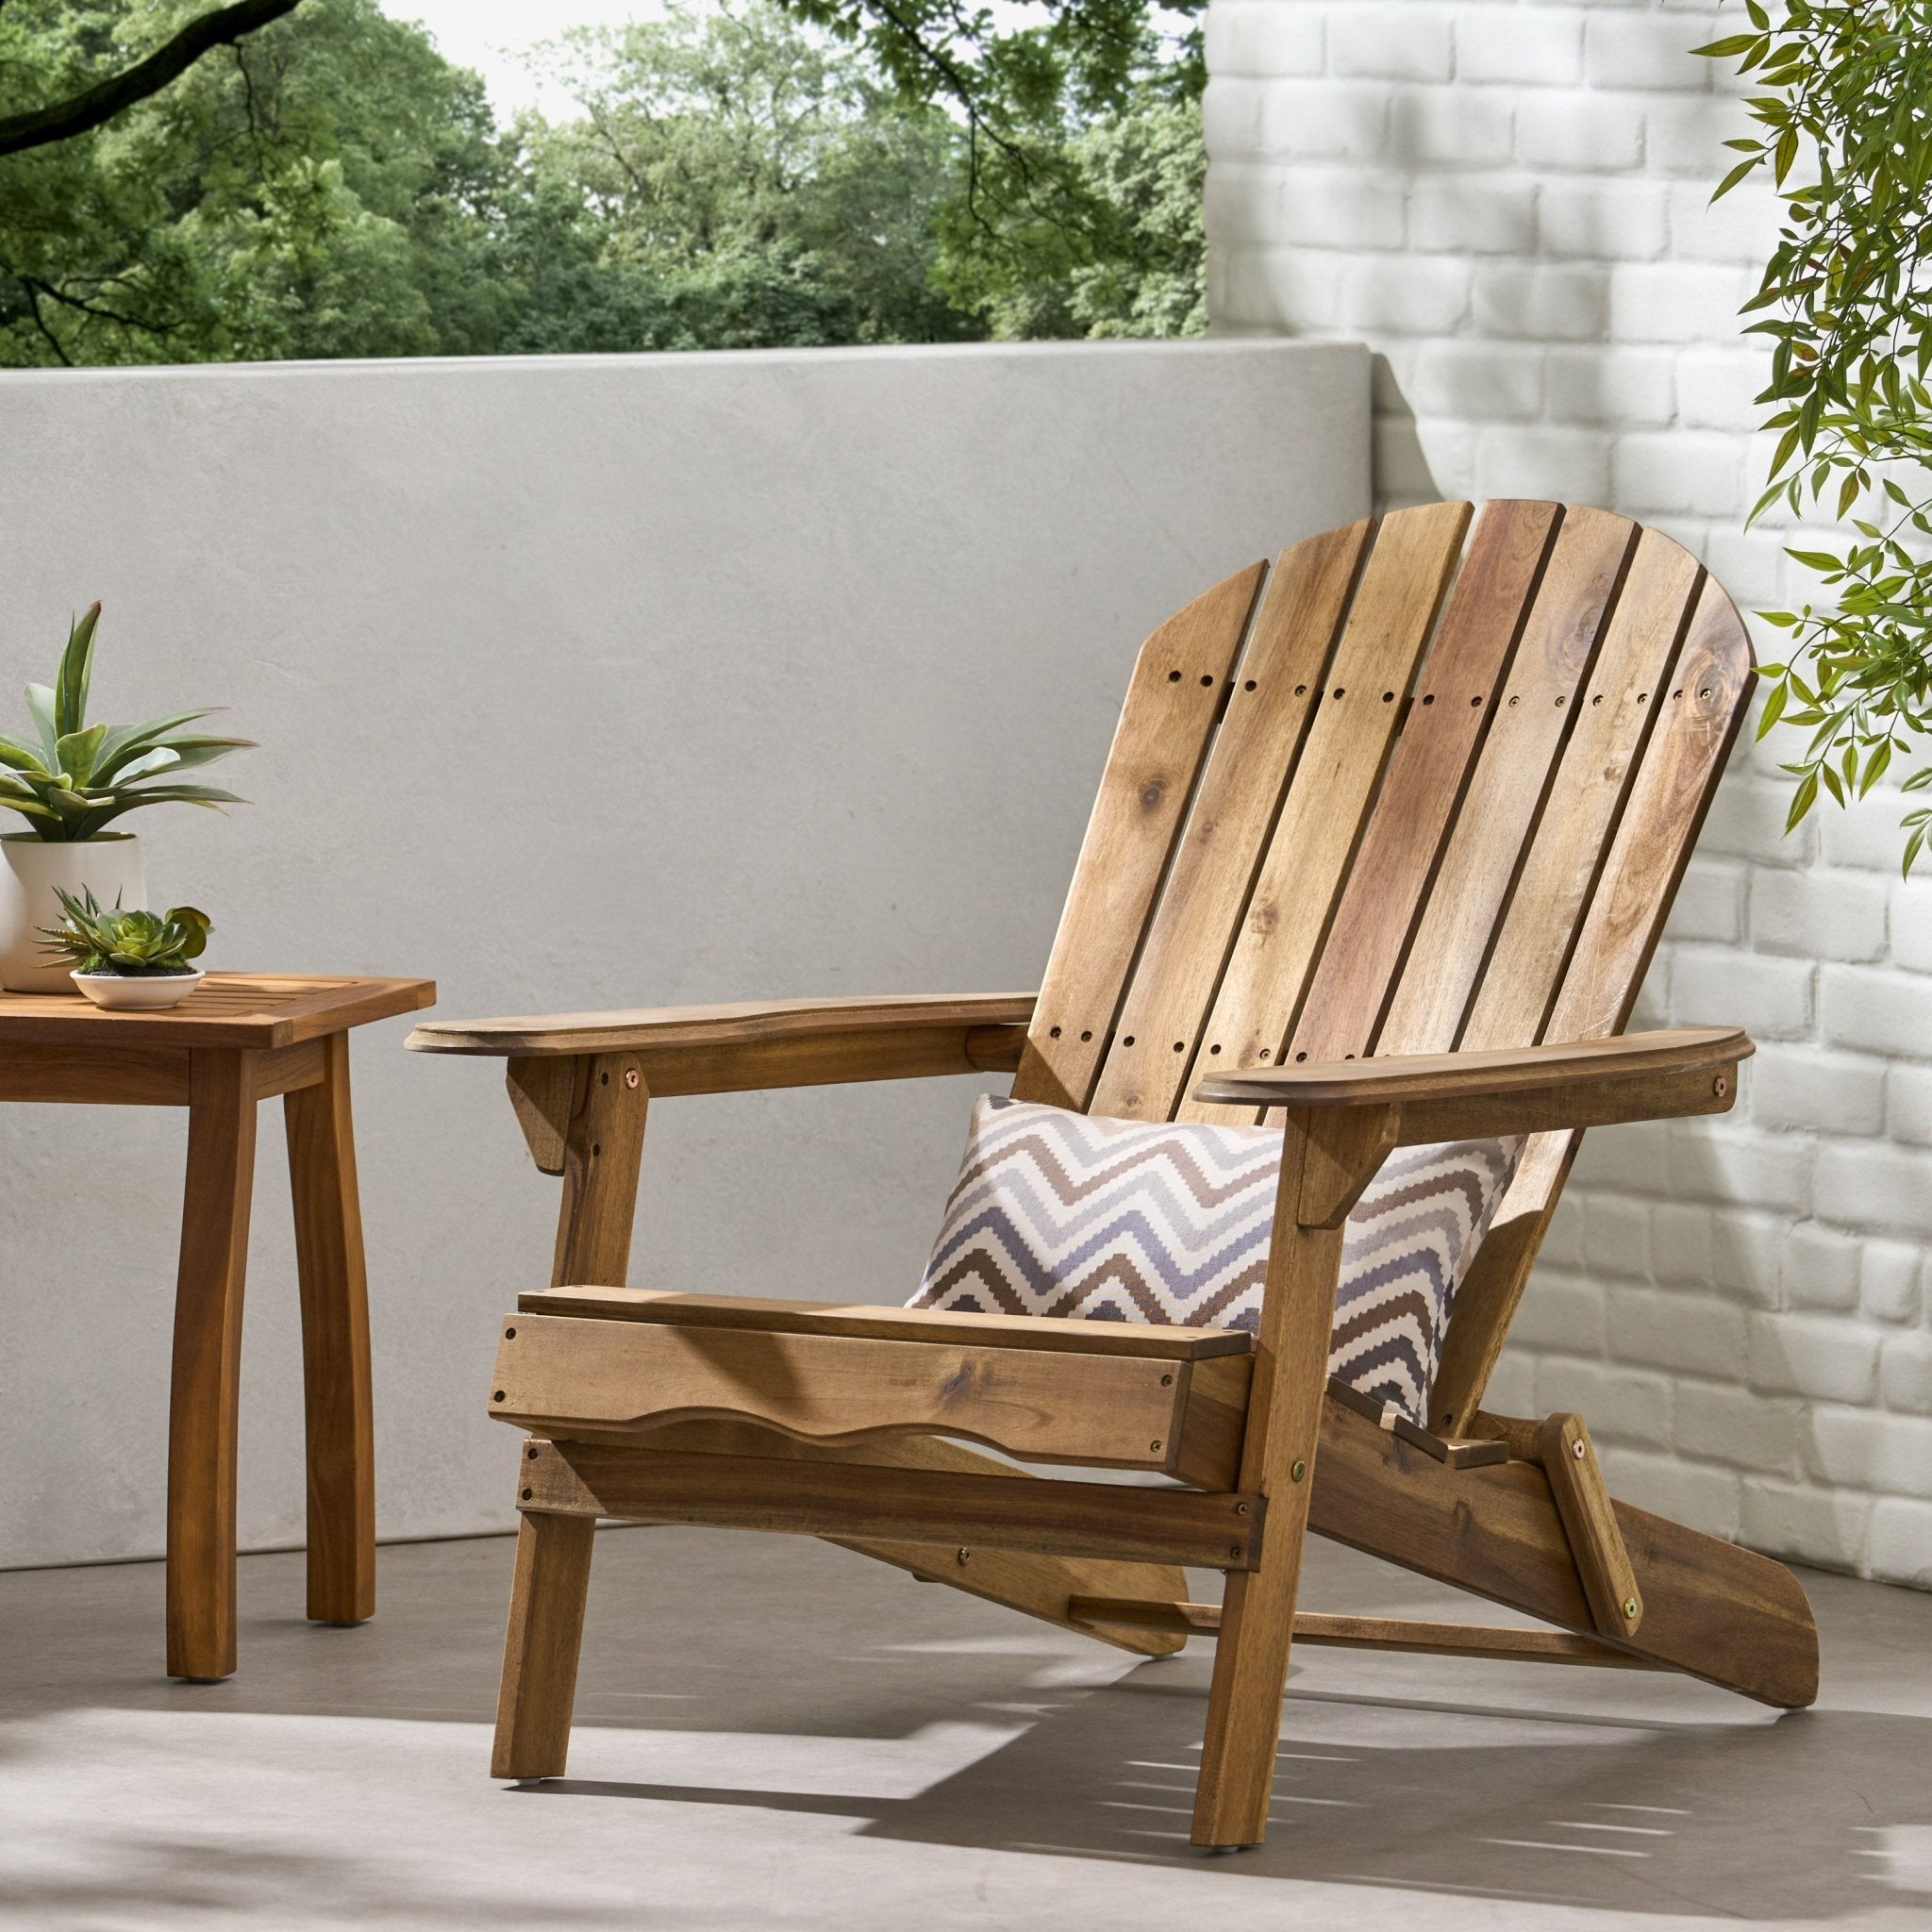 Dawn Outdoor Adirondack Chair with Slat Back and Acacia Wood Frame